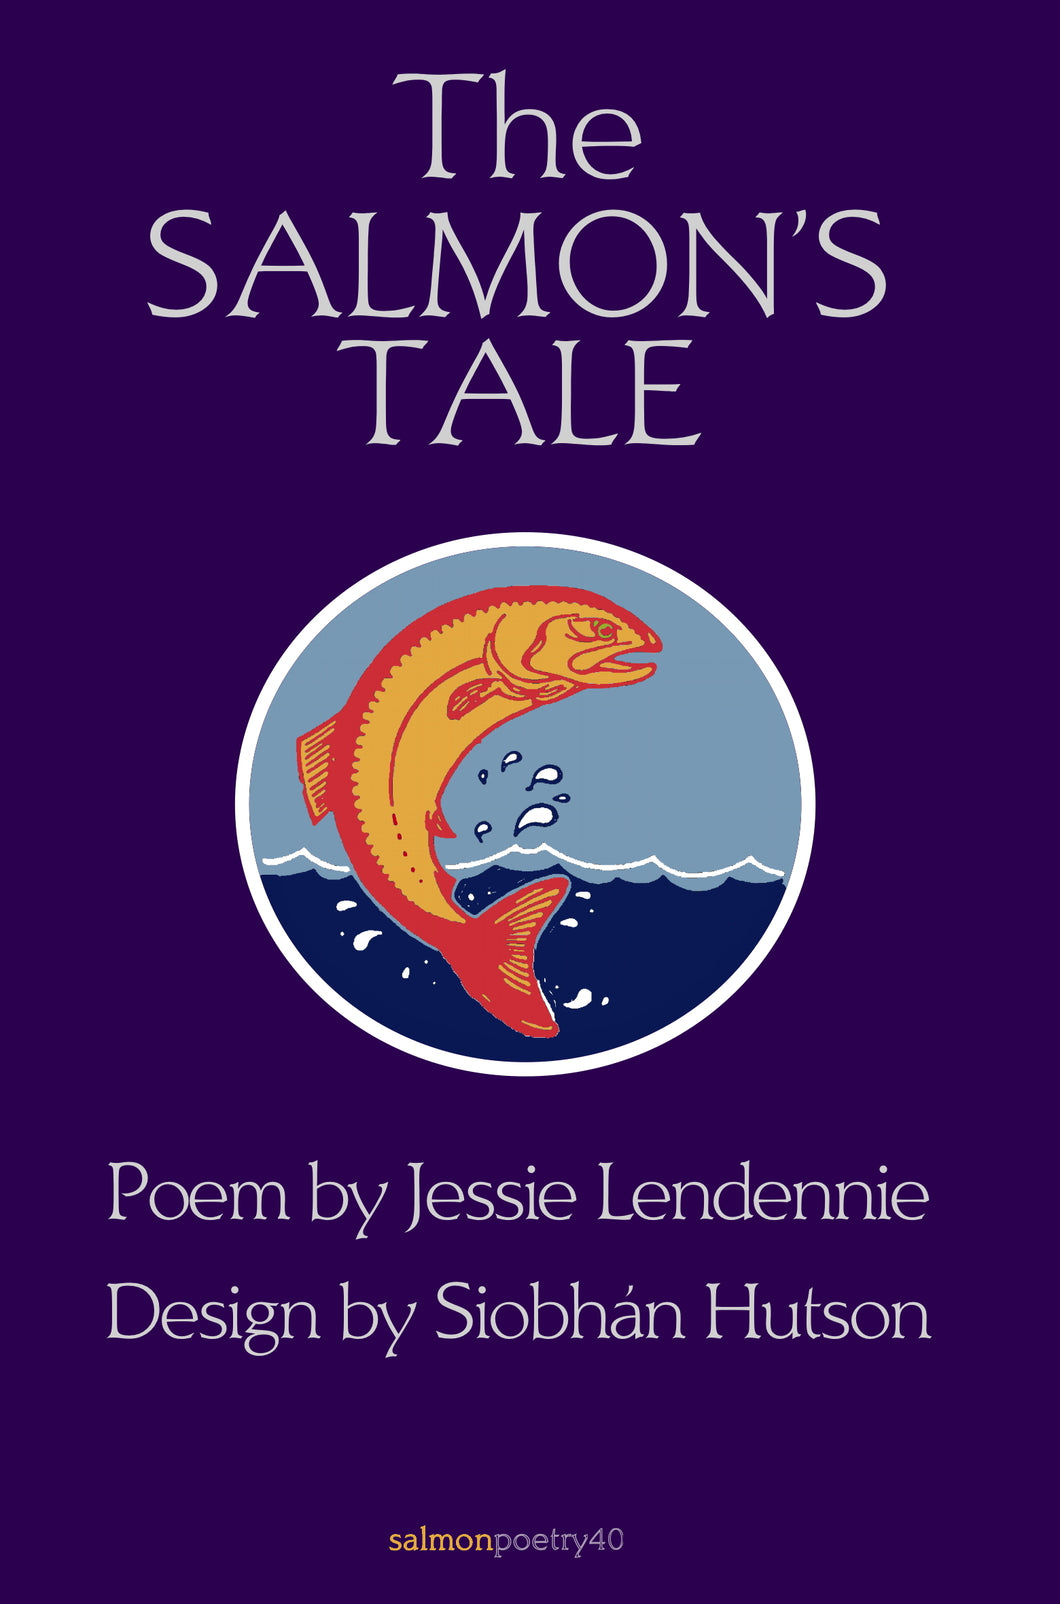 The Salmon’s Tale